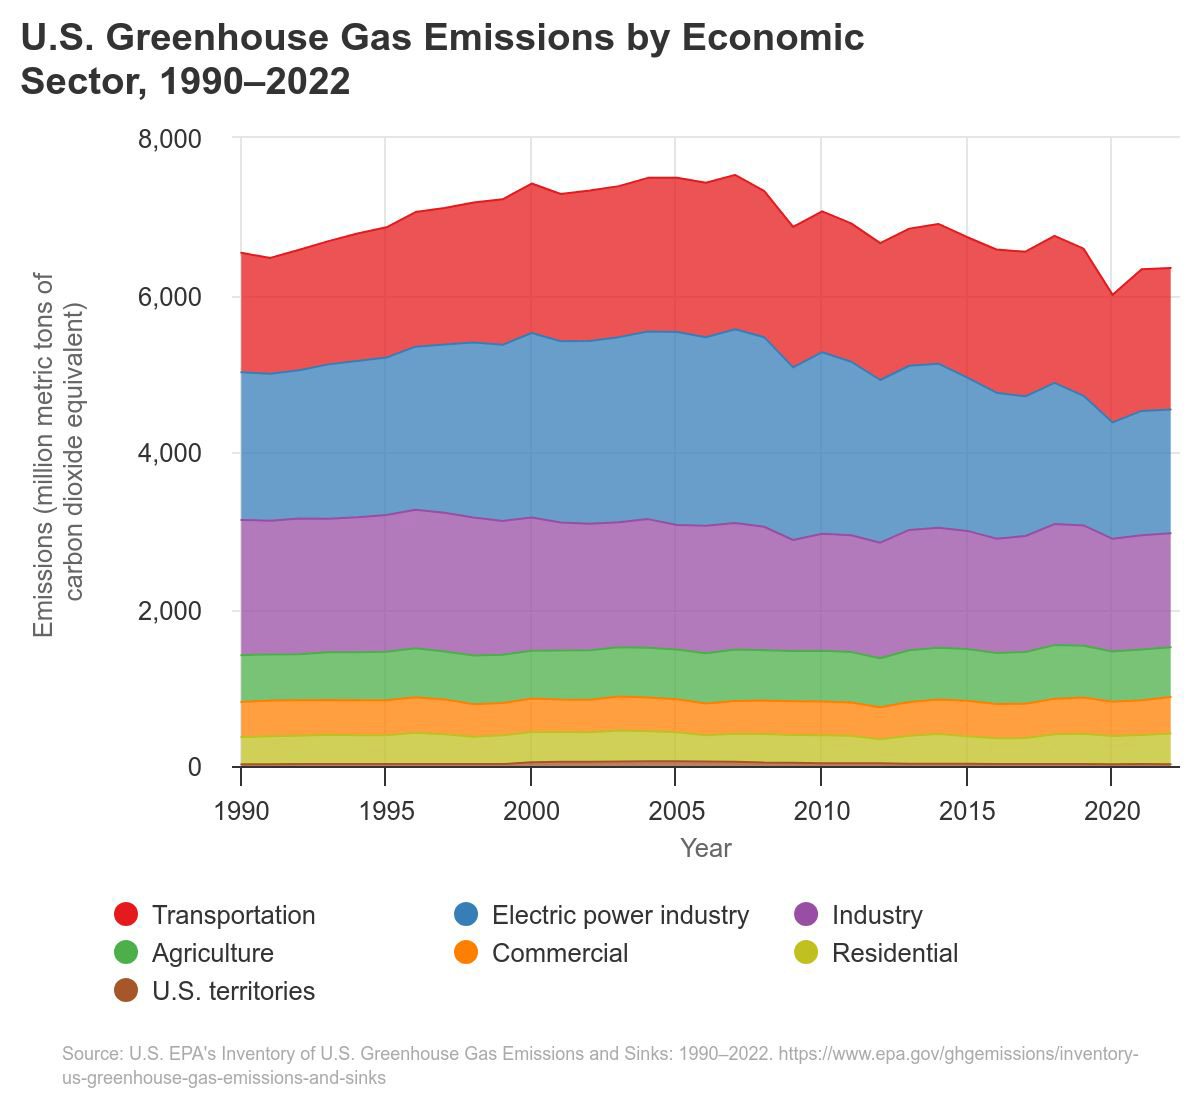 U.S. Greenhouse Gas Emissions by Economic Sector, 1990-2022